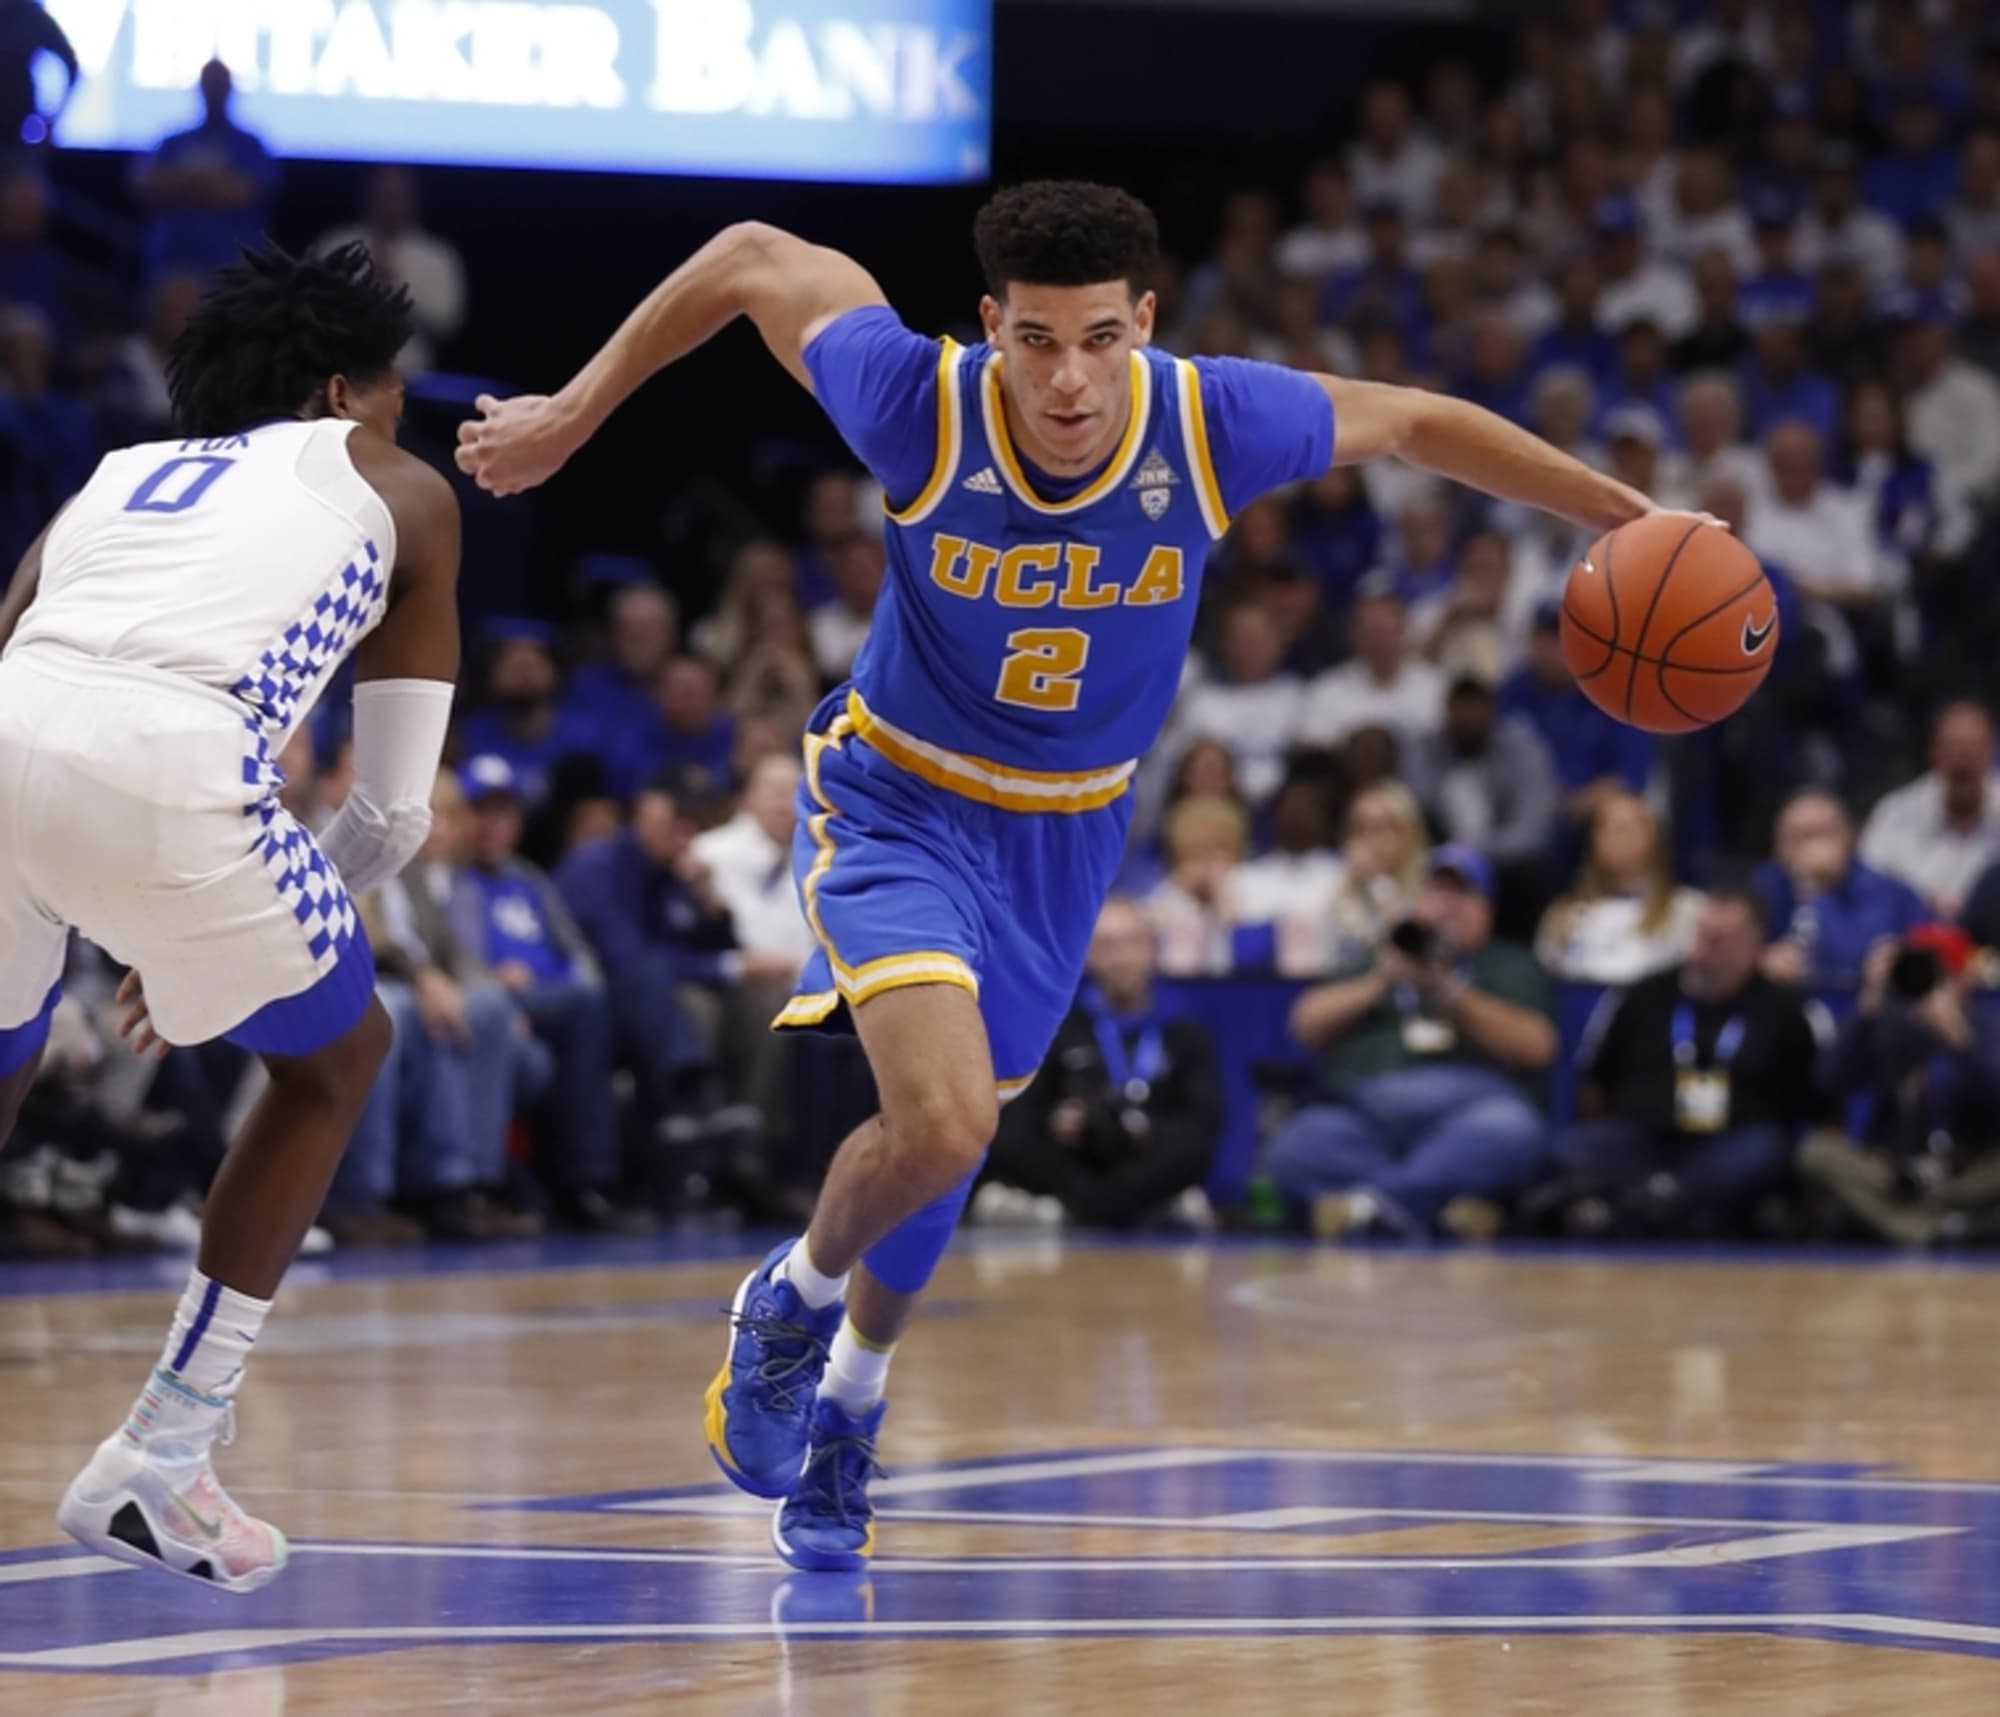 Lonzo Ball would have 'probably' skipped UCLA if father's proposed